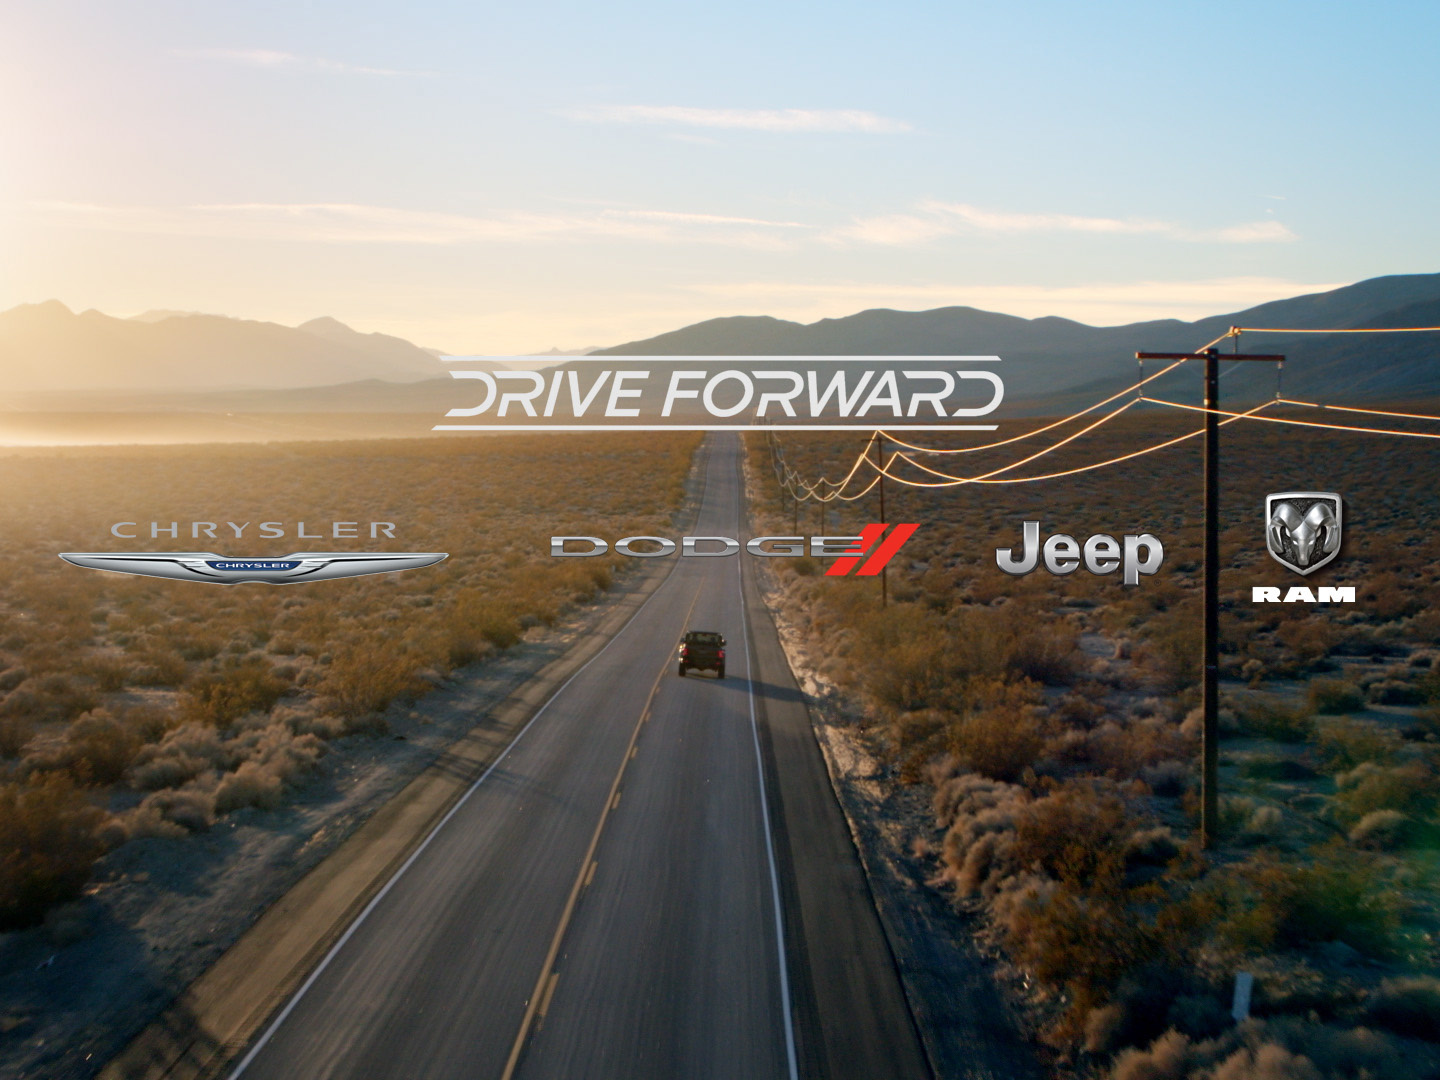 FCA's new giving and business initiative is called "Drive Forward".